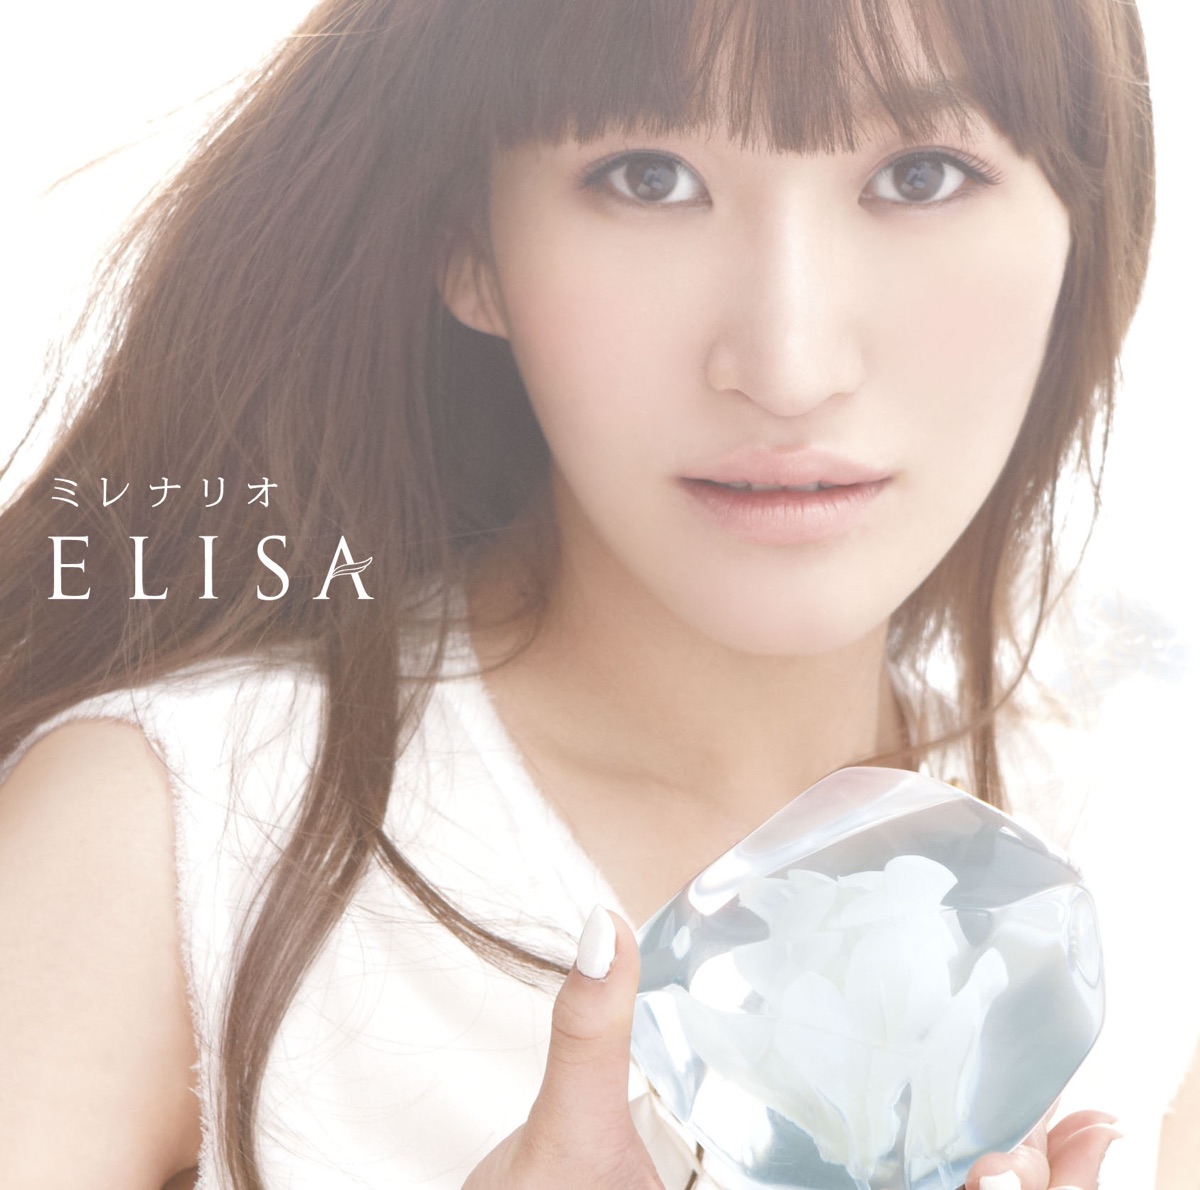 Cover art for『ELISA - ミレナリオ』from the release『Millenario